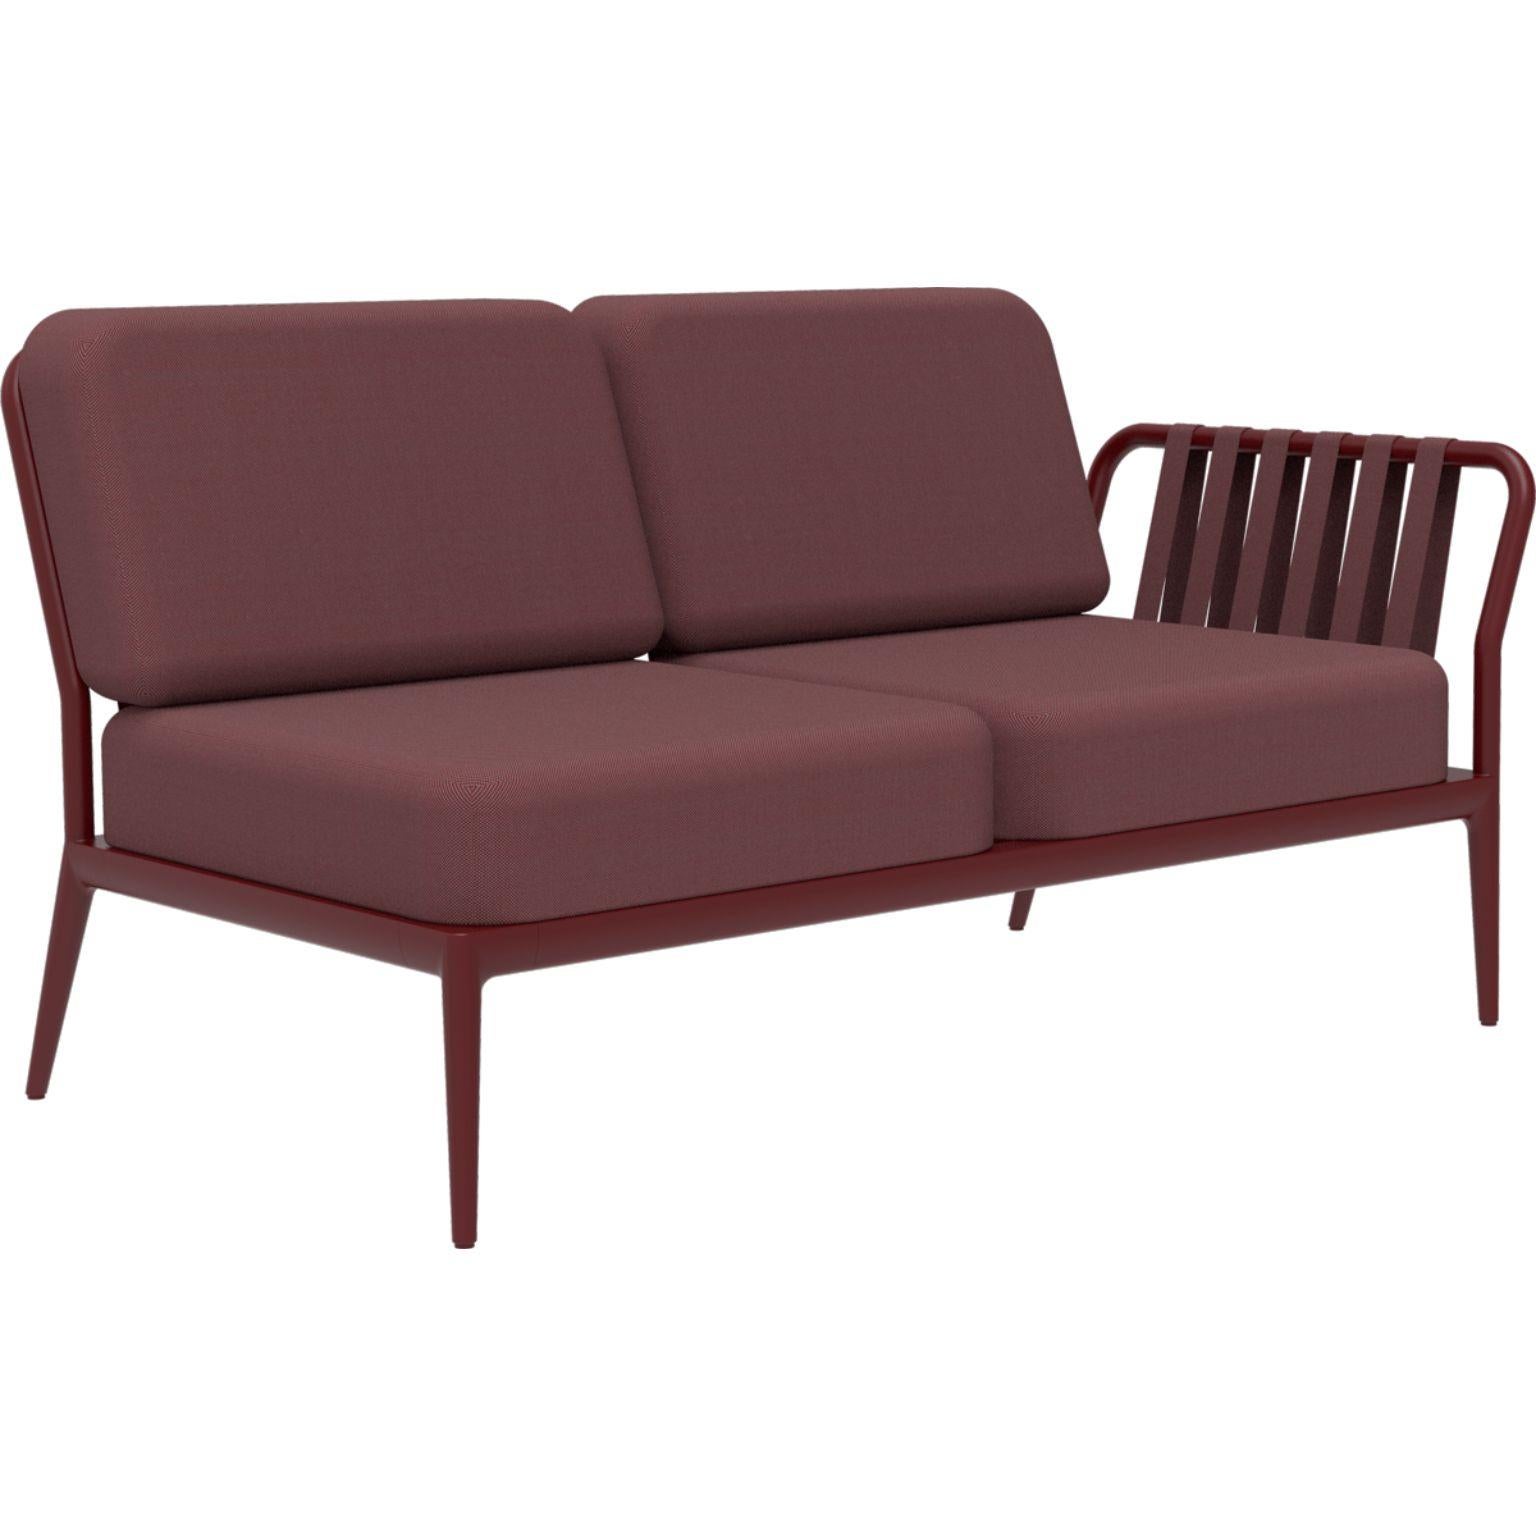 Ribbons Burgundy Double Left Modular sofa by MOWEE
Dimensions: D83 x W148 x H81 cm (seat height 42 cm).
Material: Aluminium and upholstery.
Weight: 29 kg
Also available in different colors and finishes. 

An unmistakable collection for its